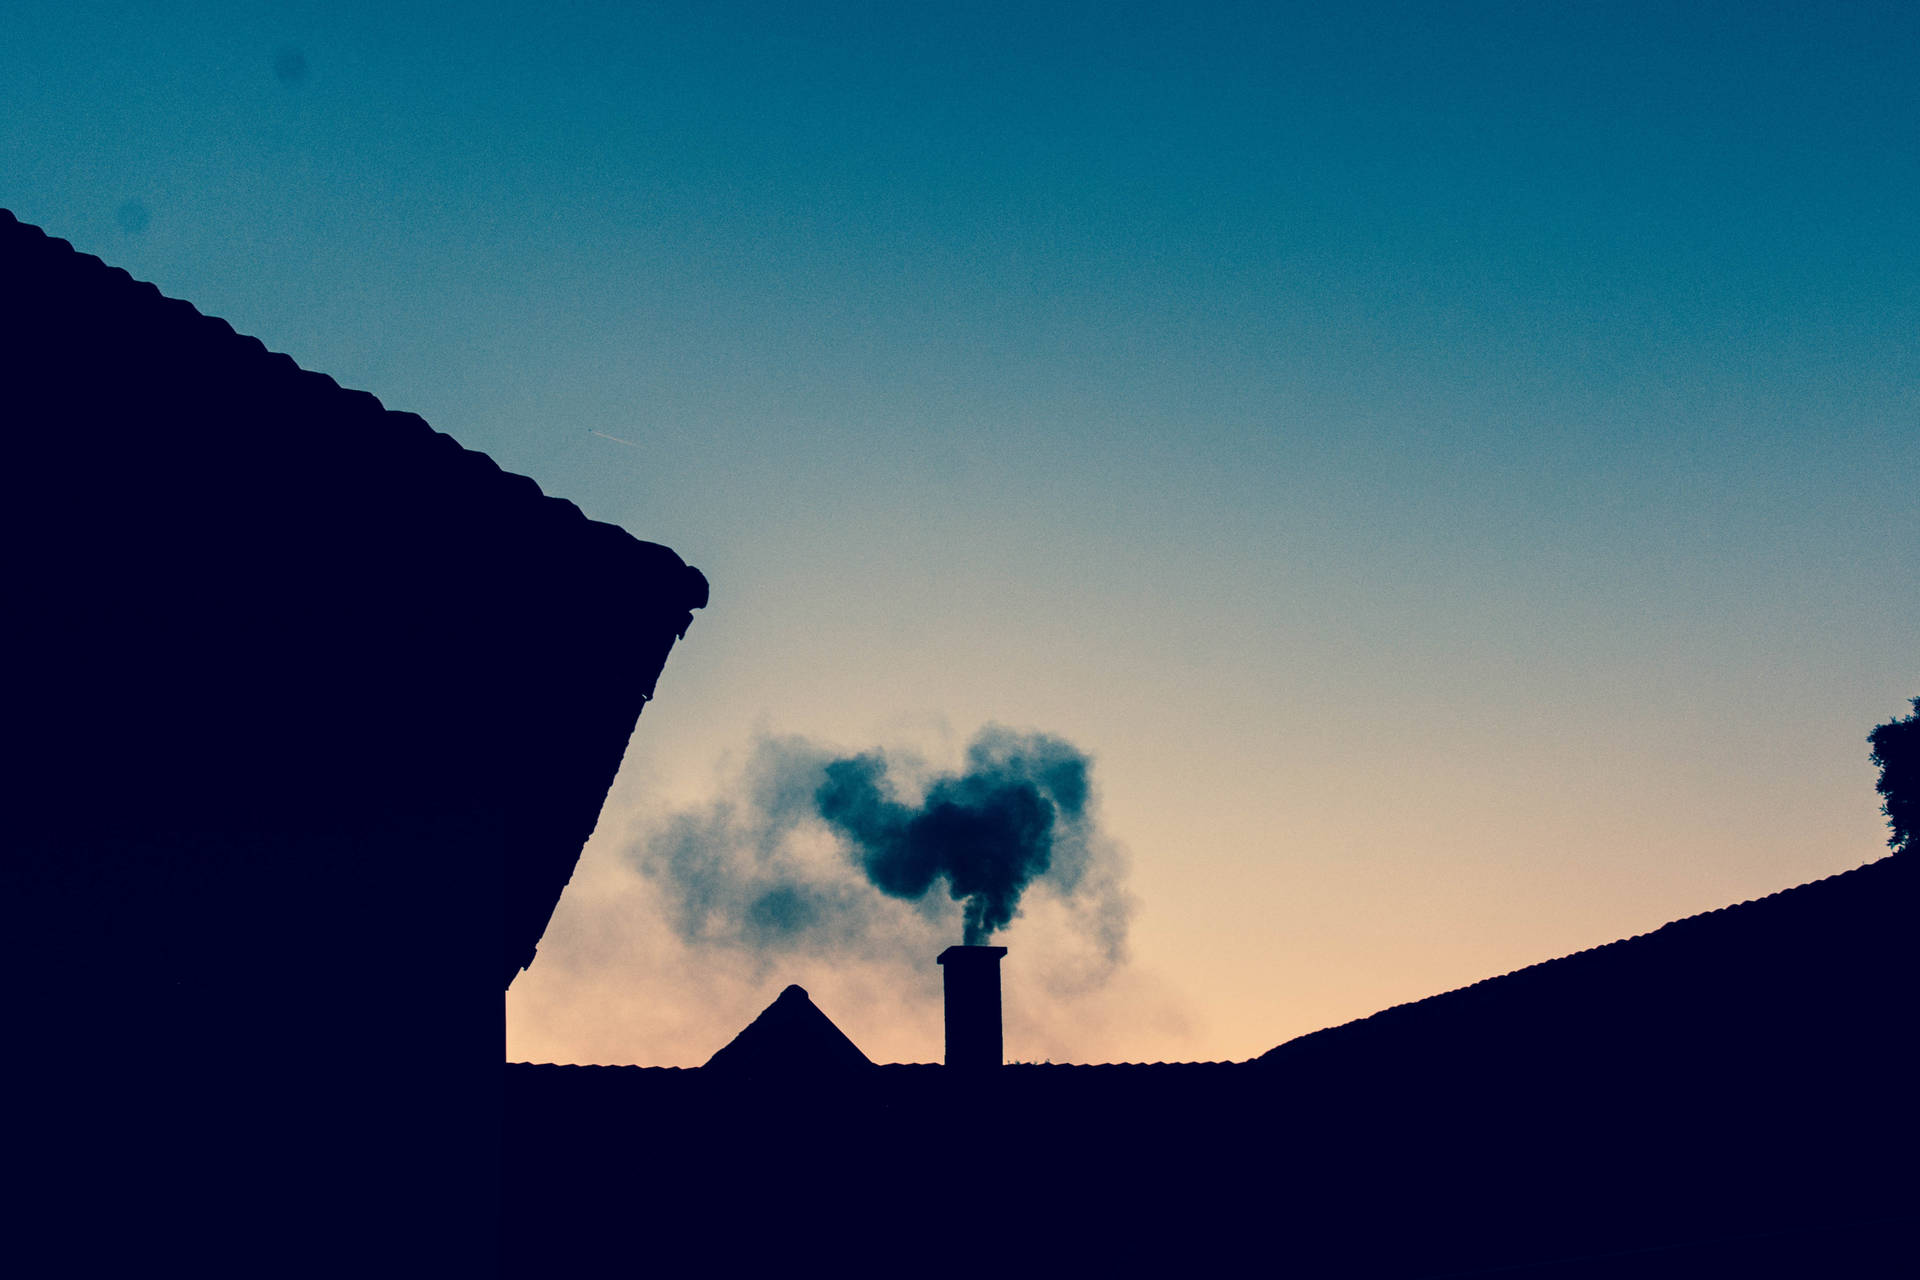 House Chimney With Smoke Hd Wallpaper